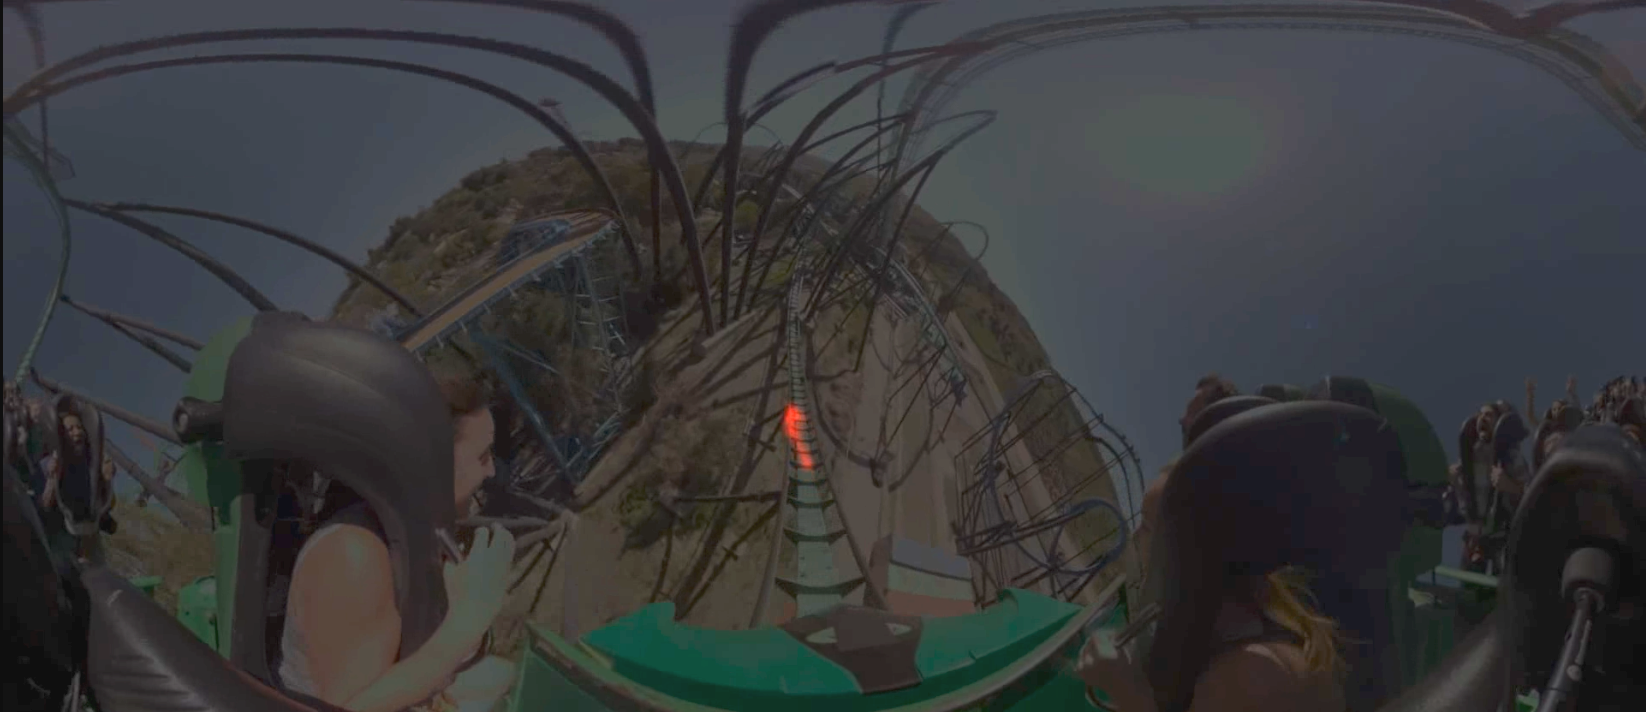 On the still image of a roller coaster video, we see at the center a red scan path indicating a high arousal as the ride decends into a dive.